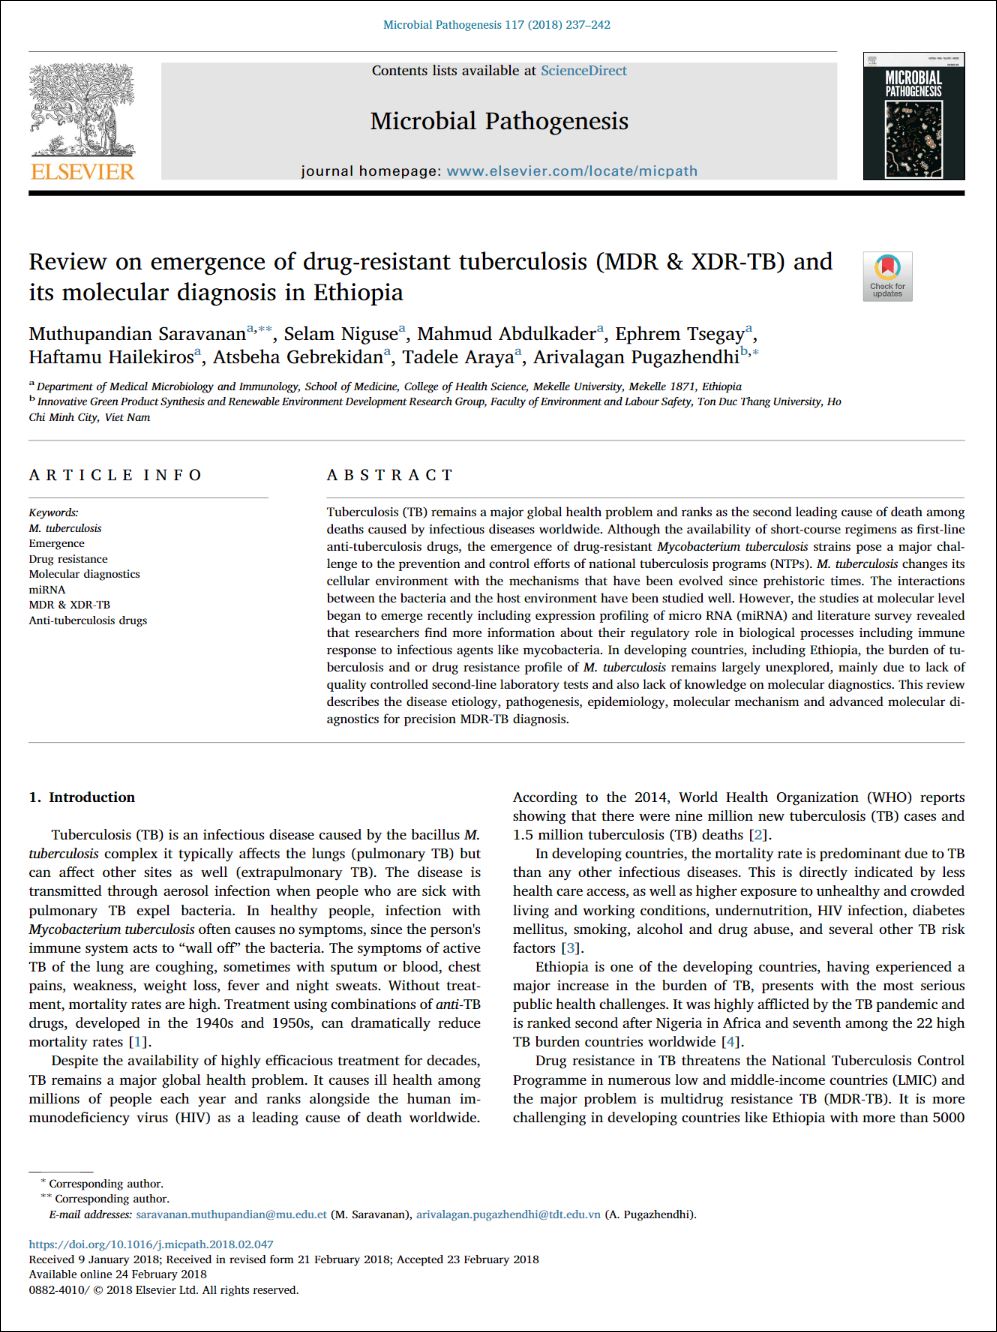 Review on emergence of drug-resistant tuberculosis (MDR & XDR-TB) and its molecular diagnosis in Ethiopia